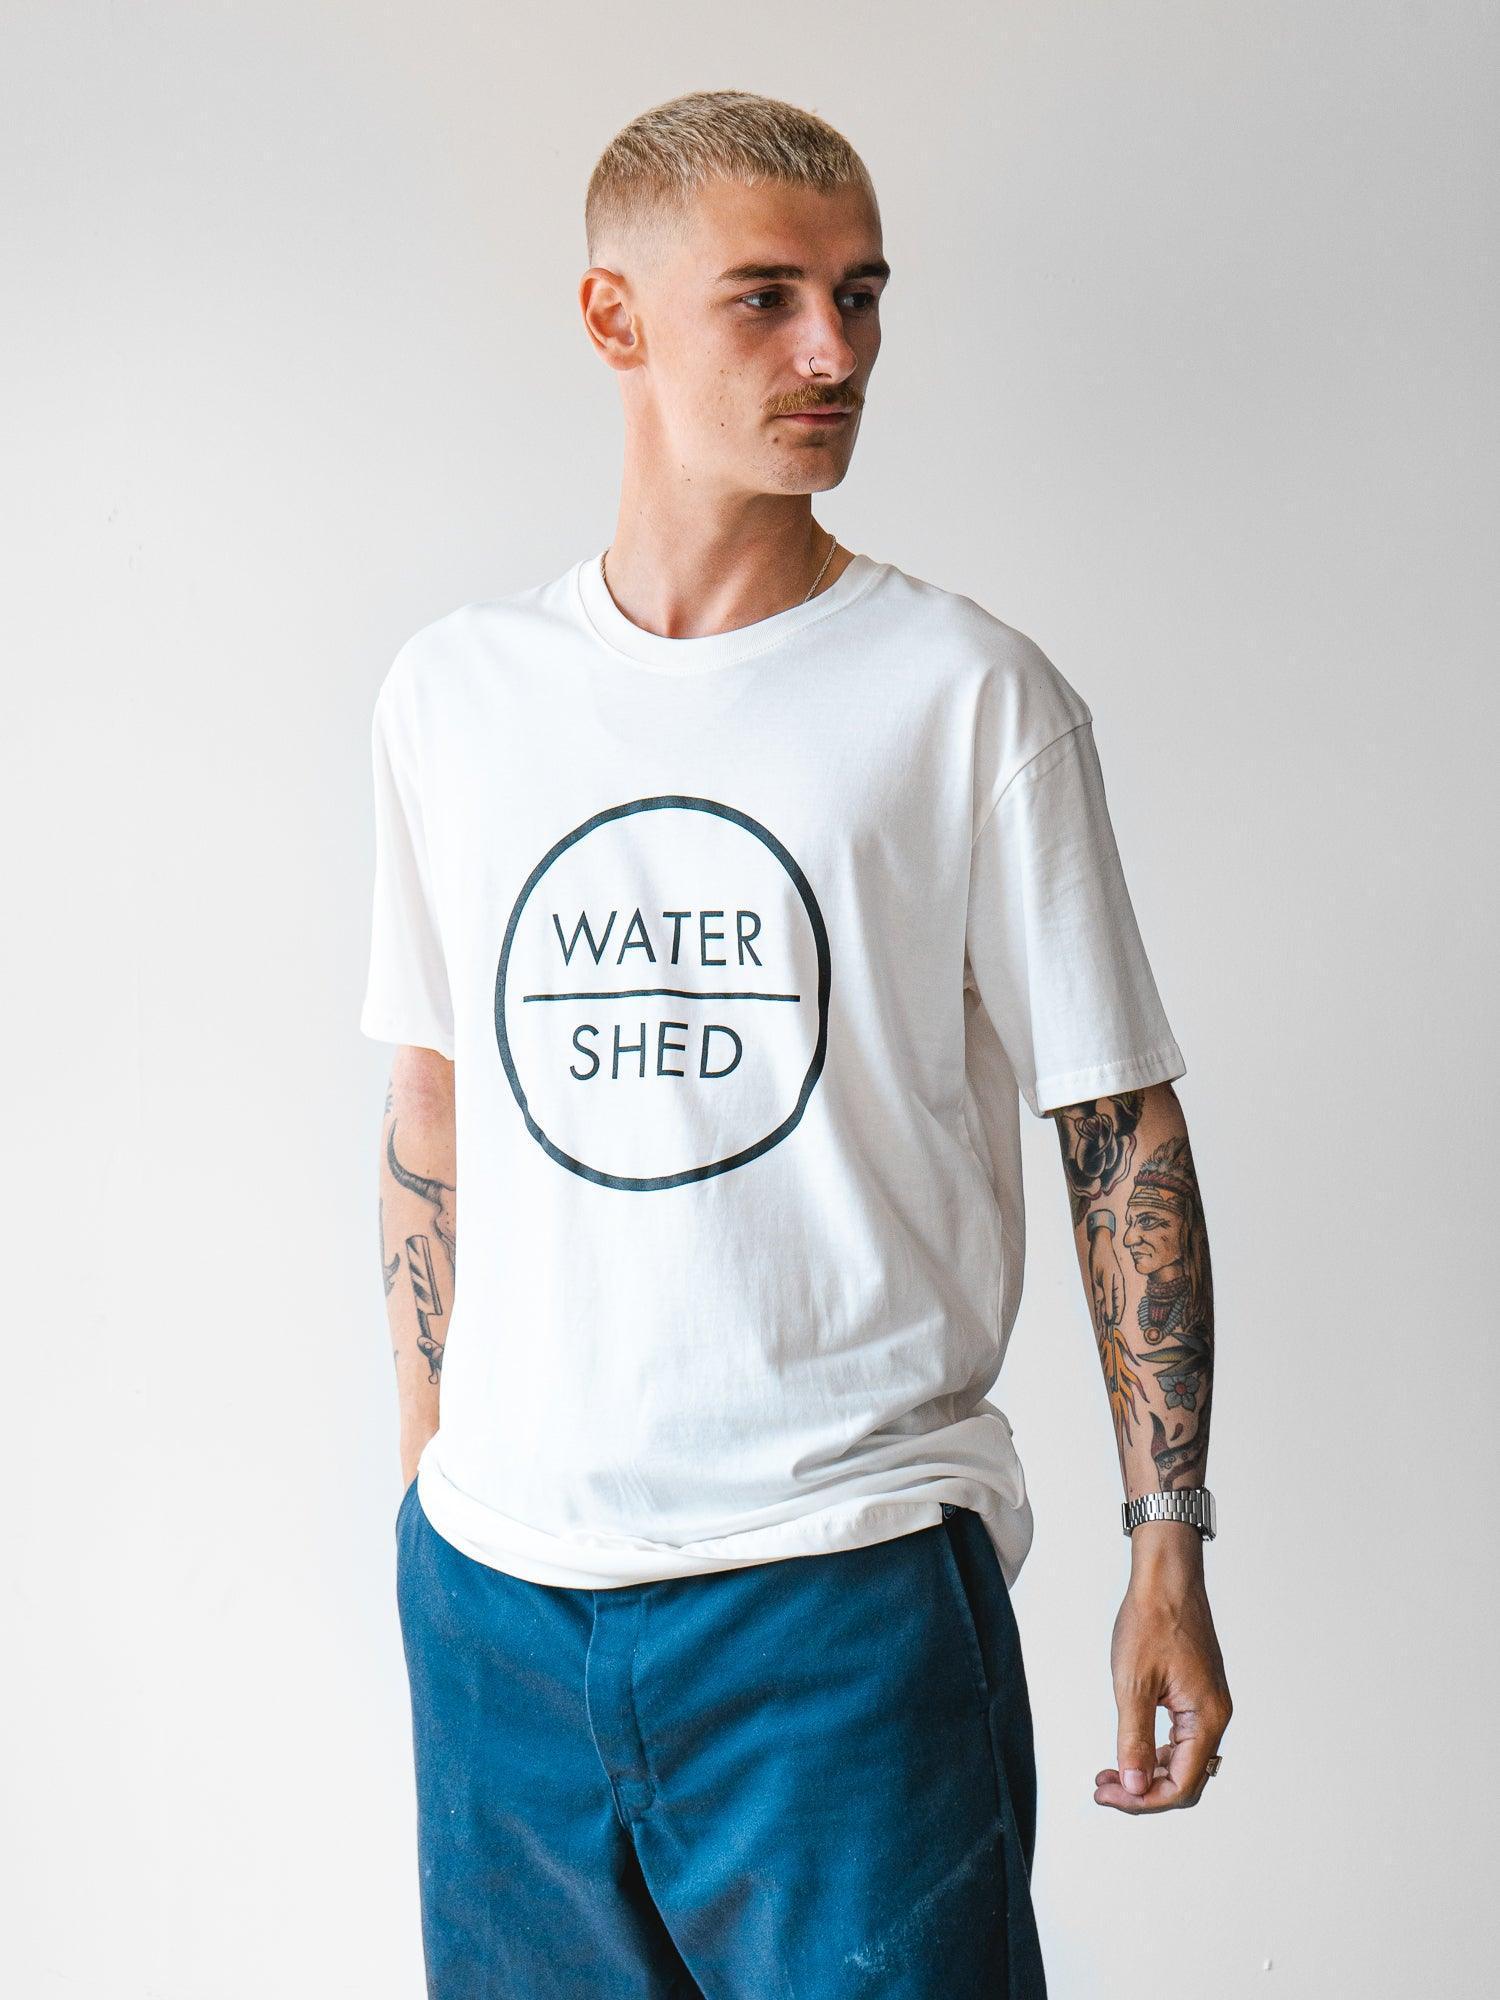 Cornish male model wearing our classic logo white surf t-shirt